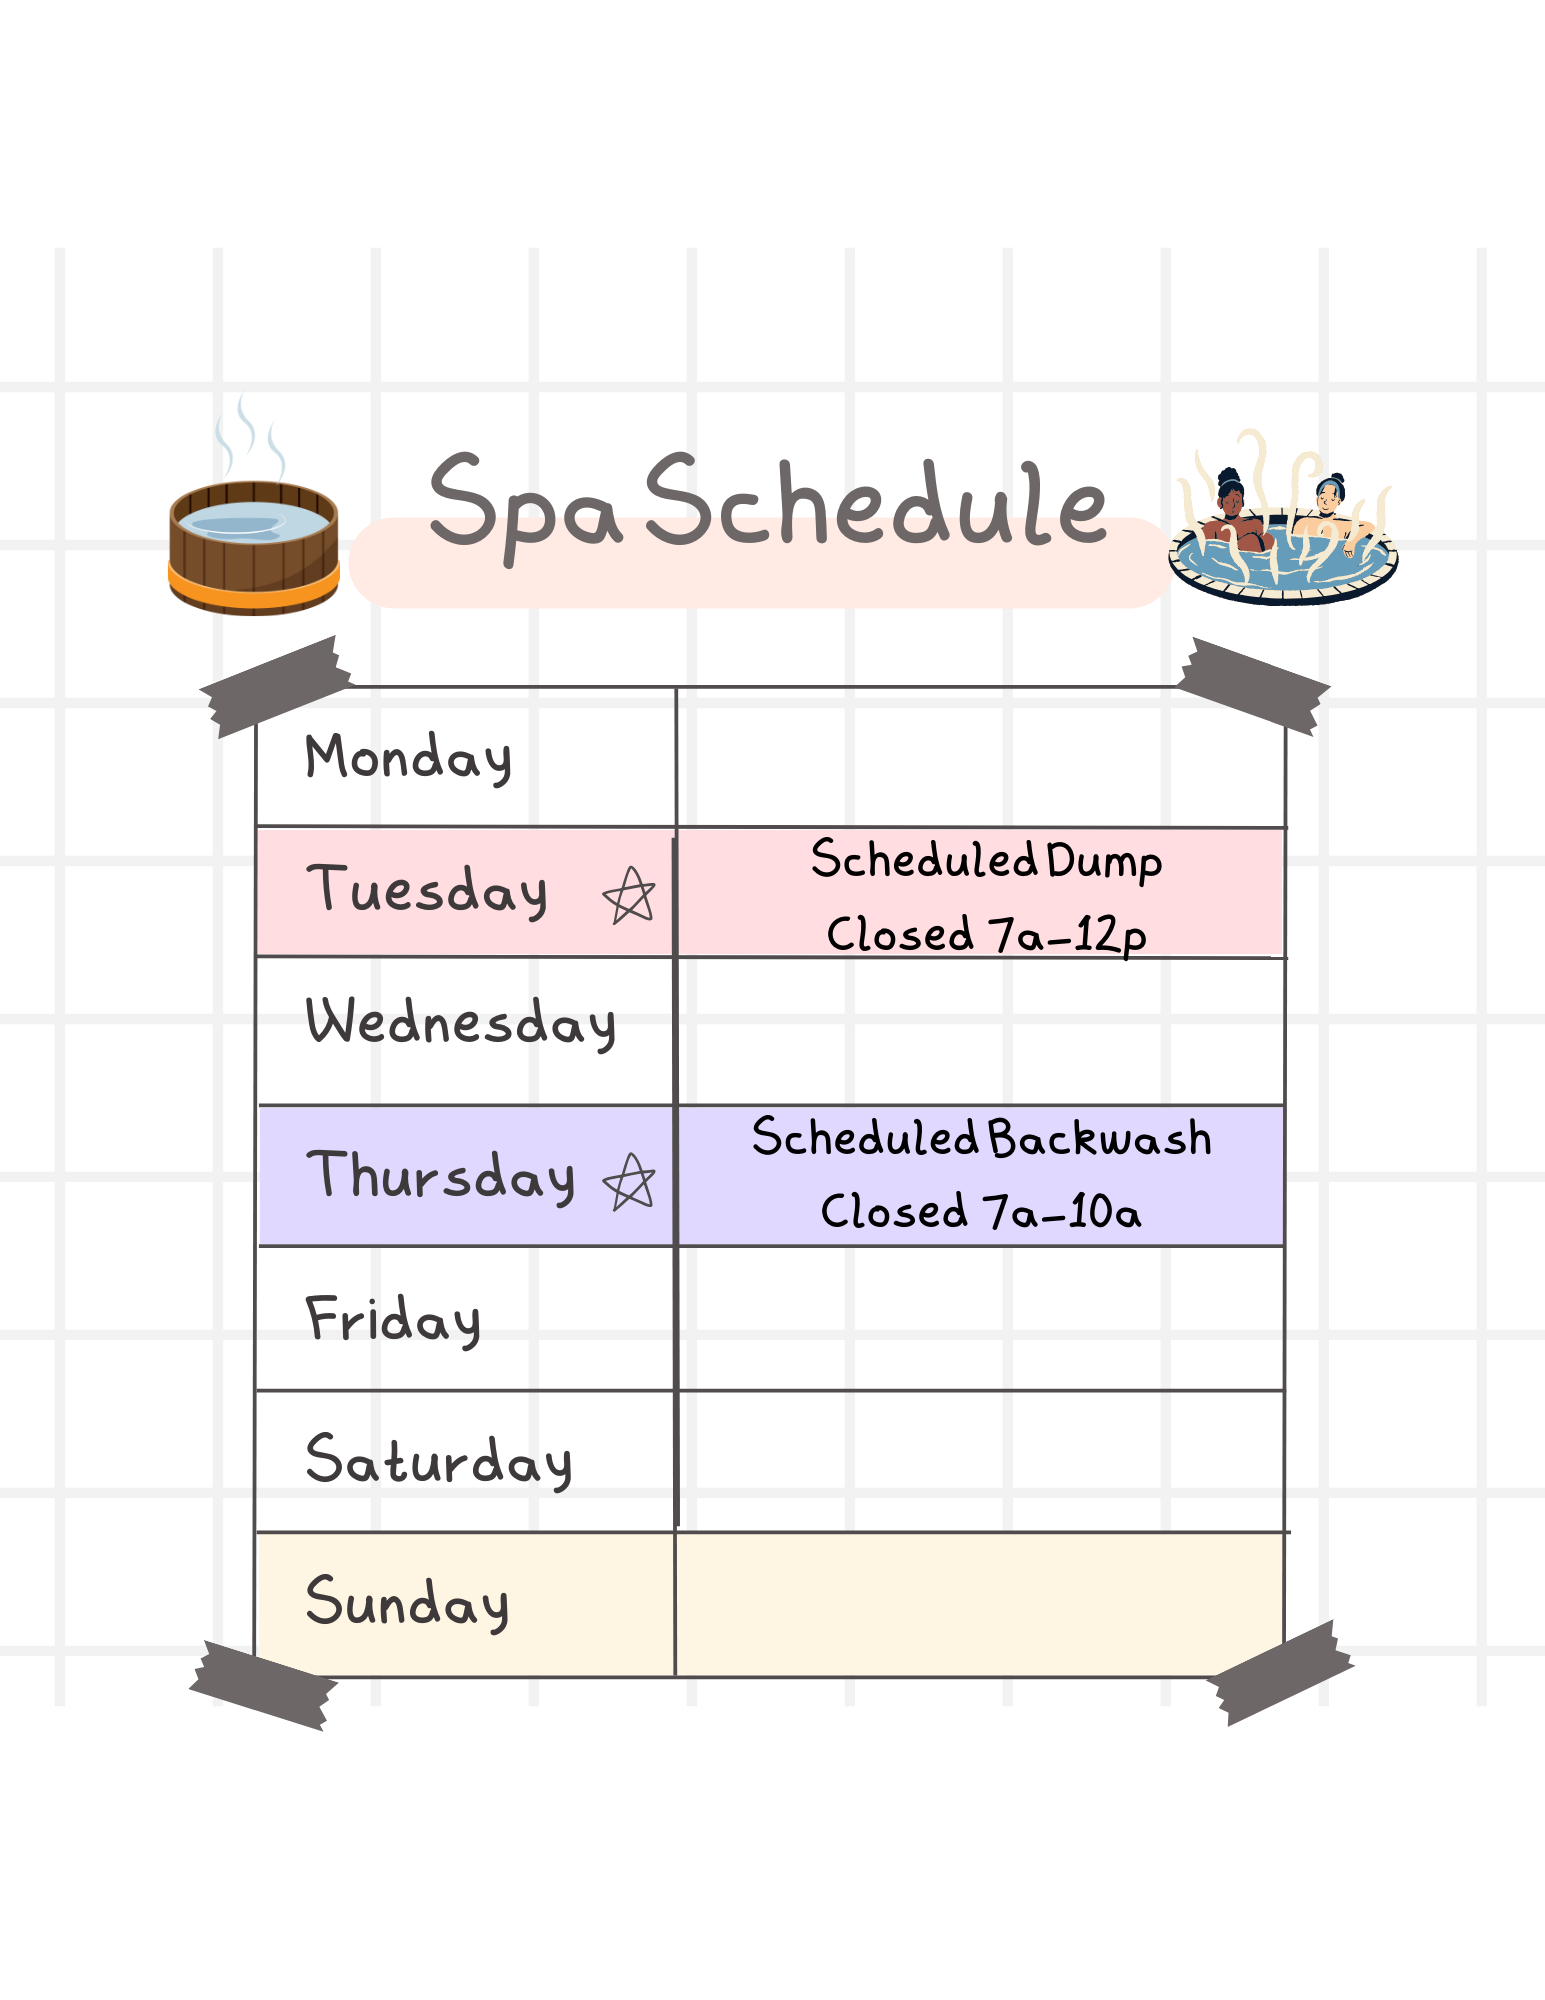 A whimsical spa schedule graphic showing a weekly timetable with cartoonish illustrations. On the top left, a wooden hot tub with steam rising and on the top right, two people relaxing in a pool float. The schedule lists days of the week with specific maintenance activities and closure times for Tuesday and Thursday mornings.